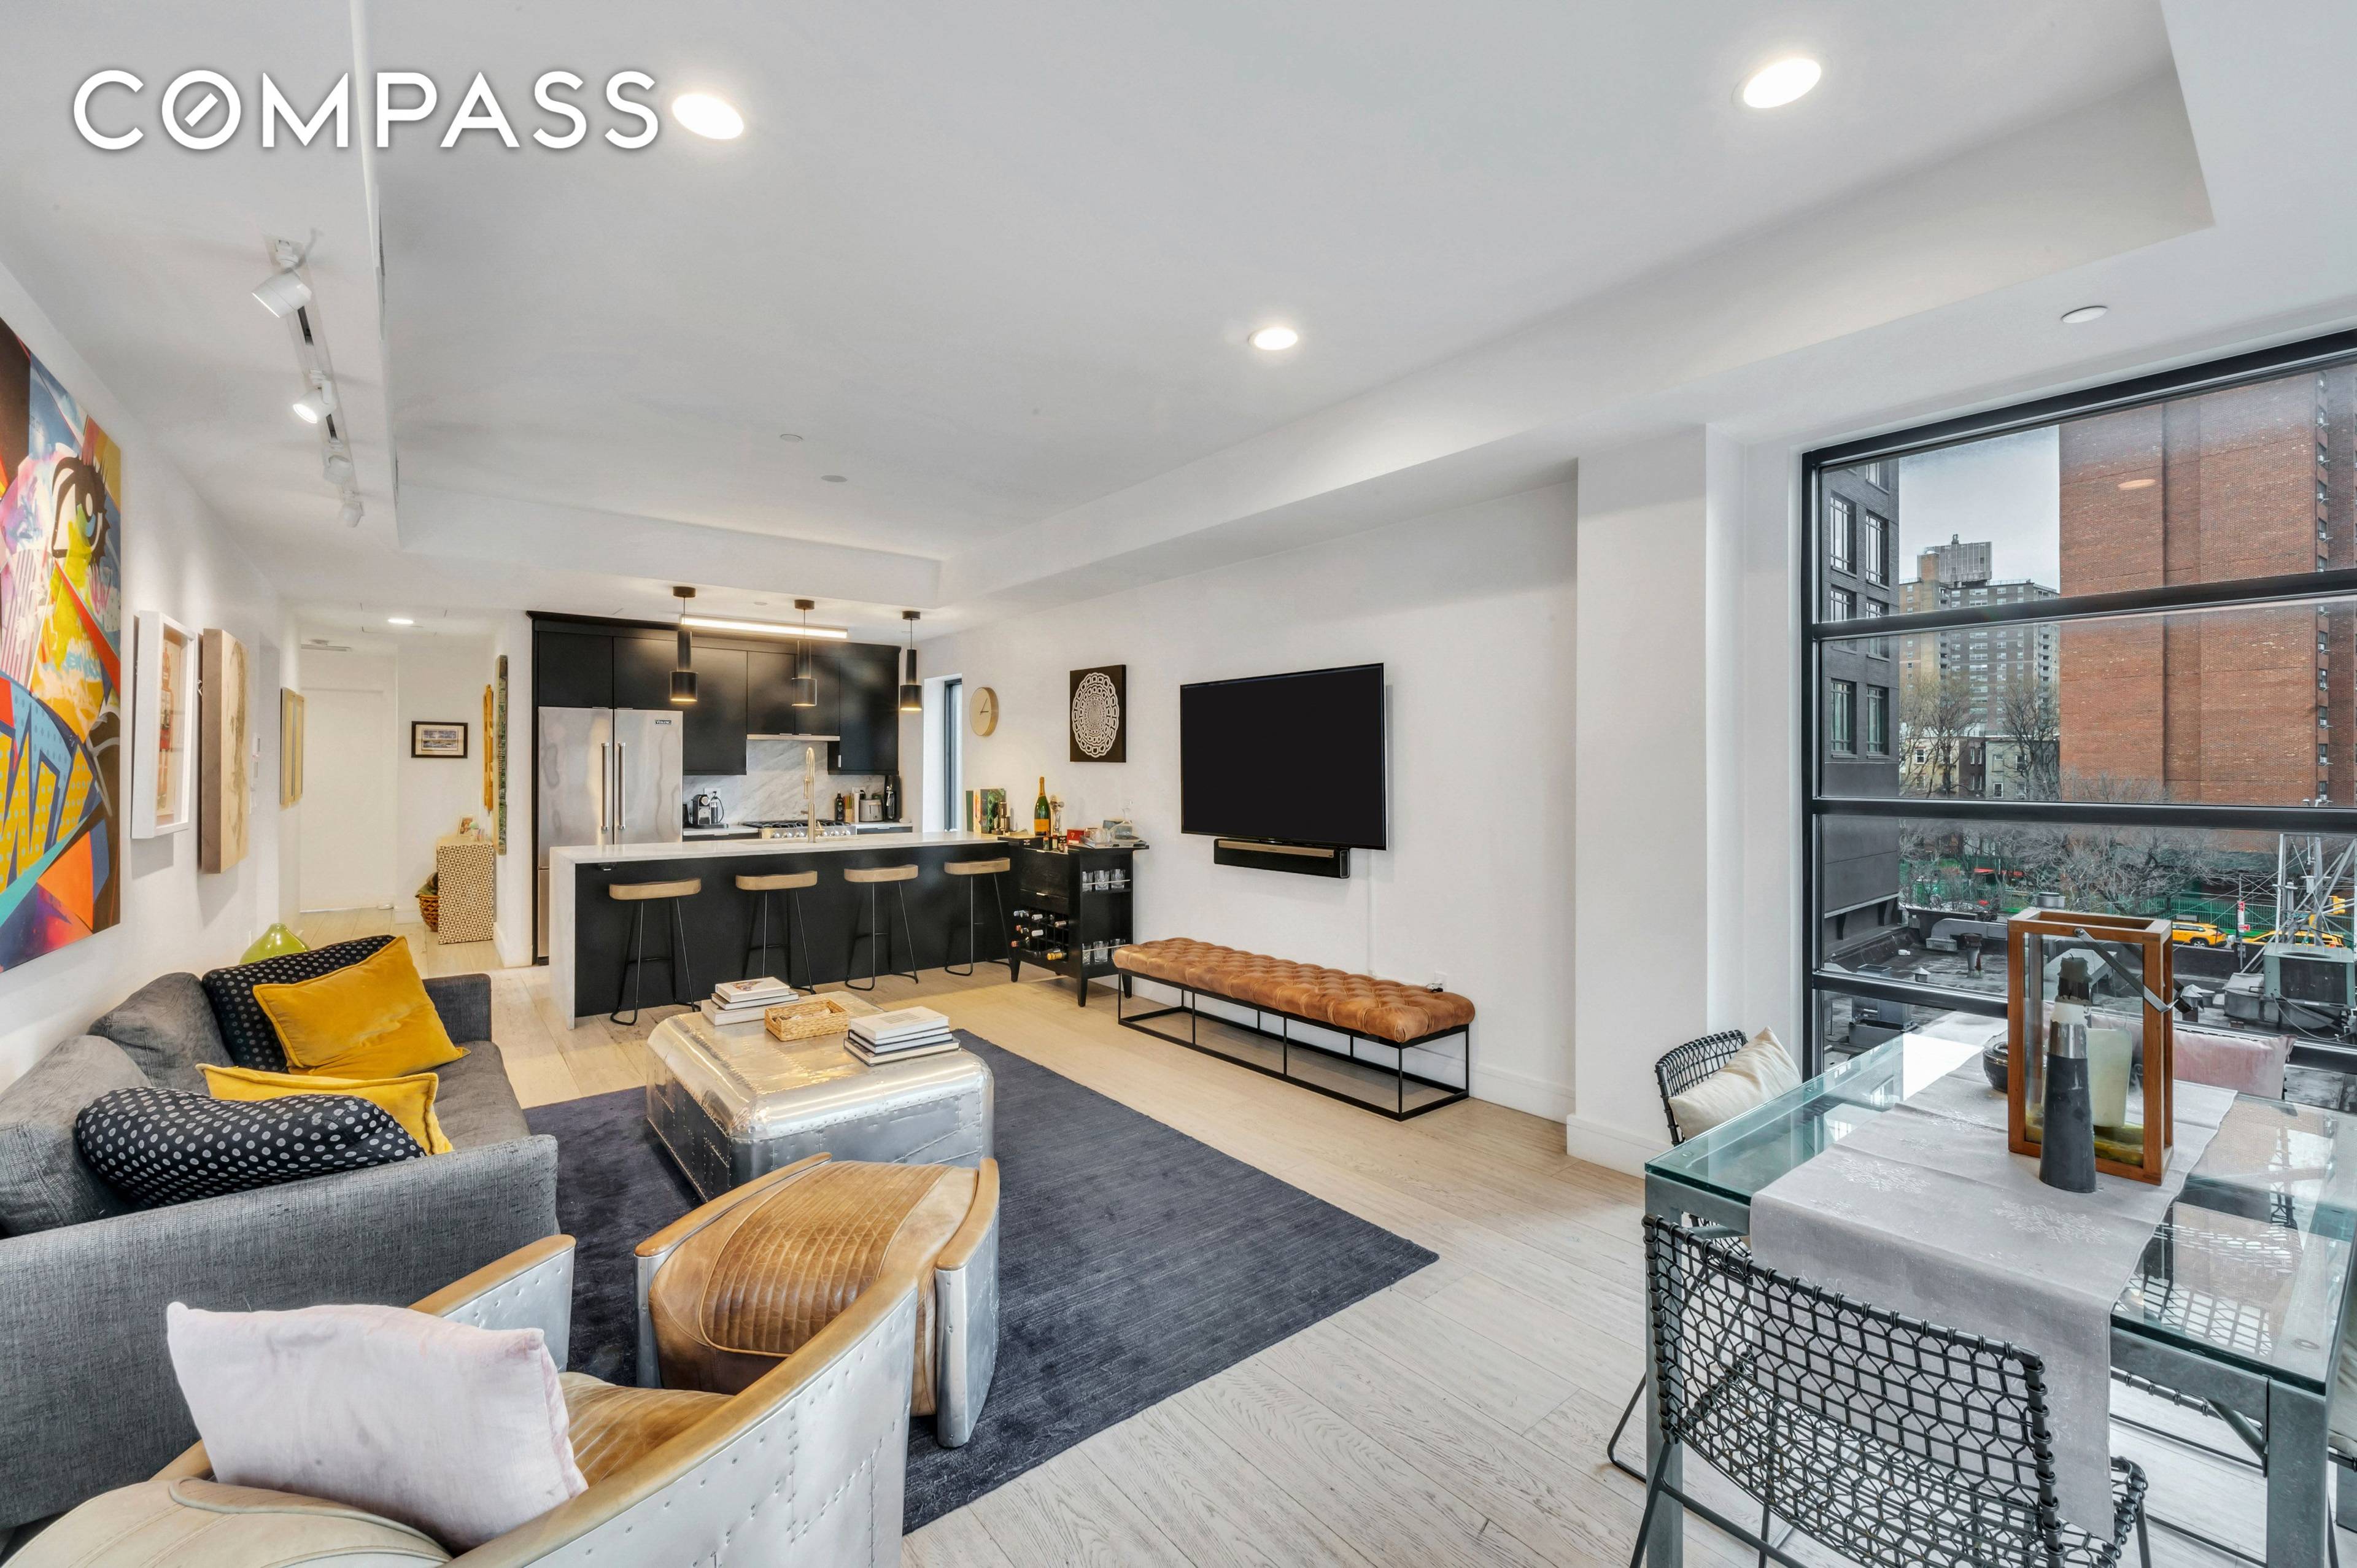 Enjoy the privacy and luxury of this full floor two bed, two bath apartment in the heart of the Lower East Side with E W and N exposures.